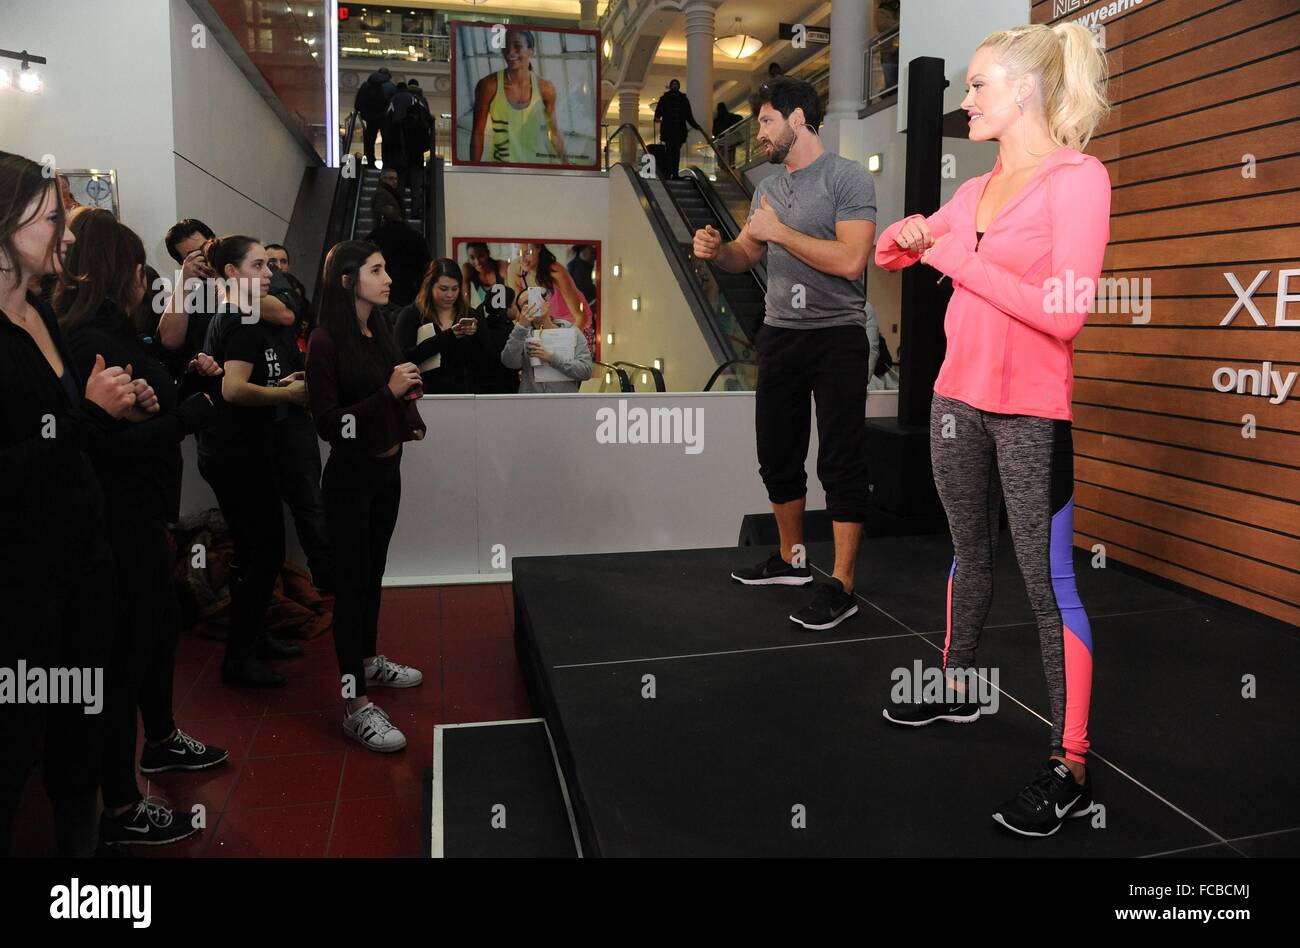 Peta Murgatroyd At A Public Appearance For Jcpenney Promotes Exclusive  Xersion Activewear With Latin Dance Lessons For Shoppers, Manhattan 